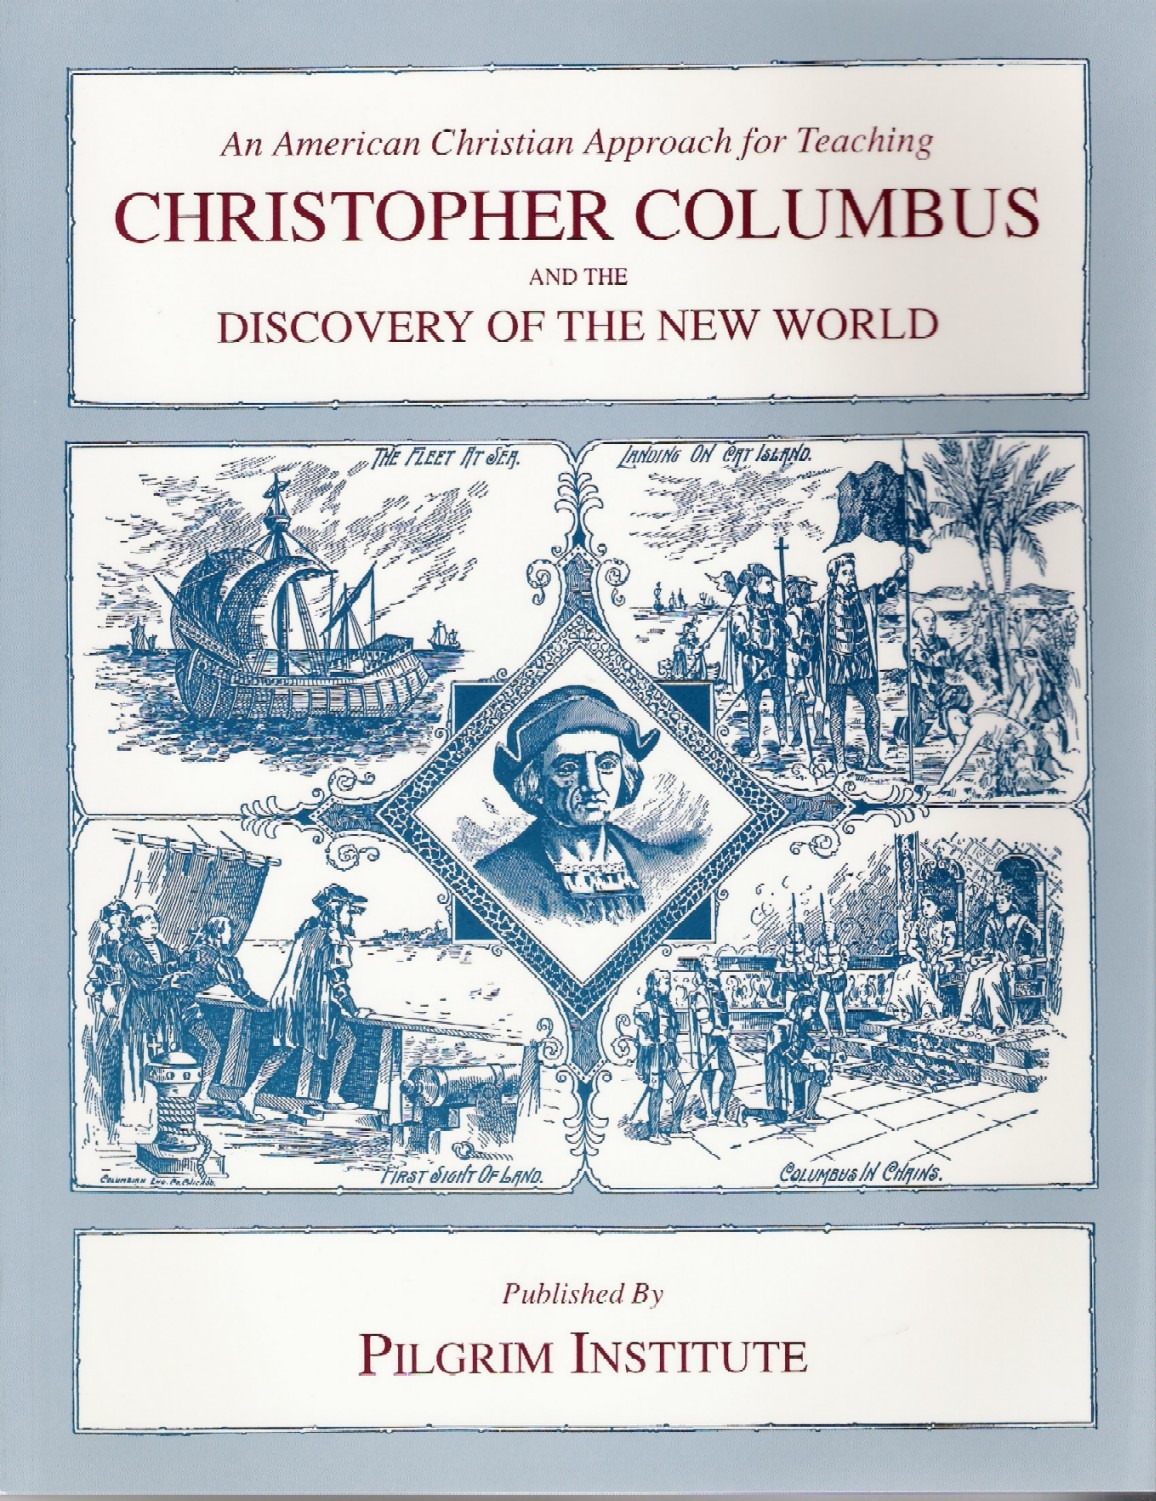 Teaching Christopher Columbus and the Discovery of the New World